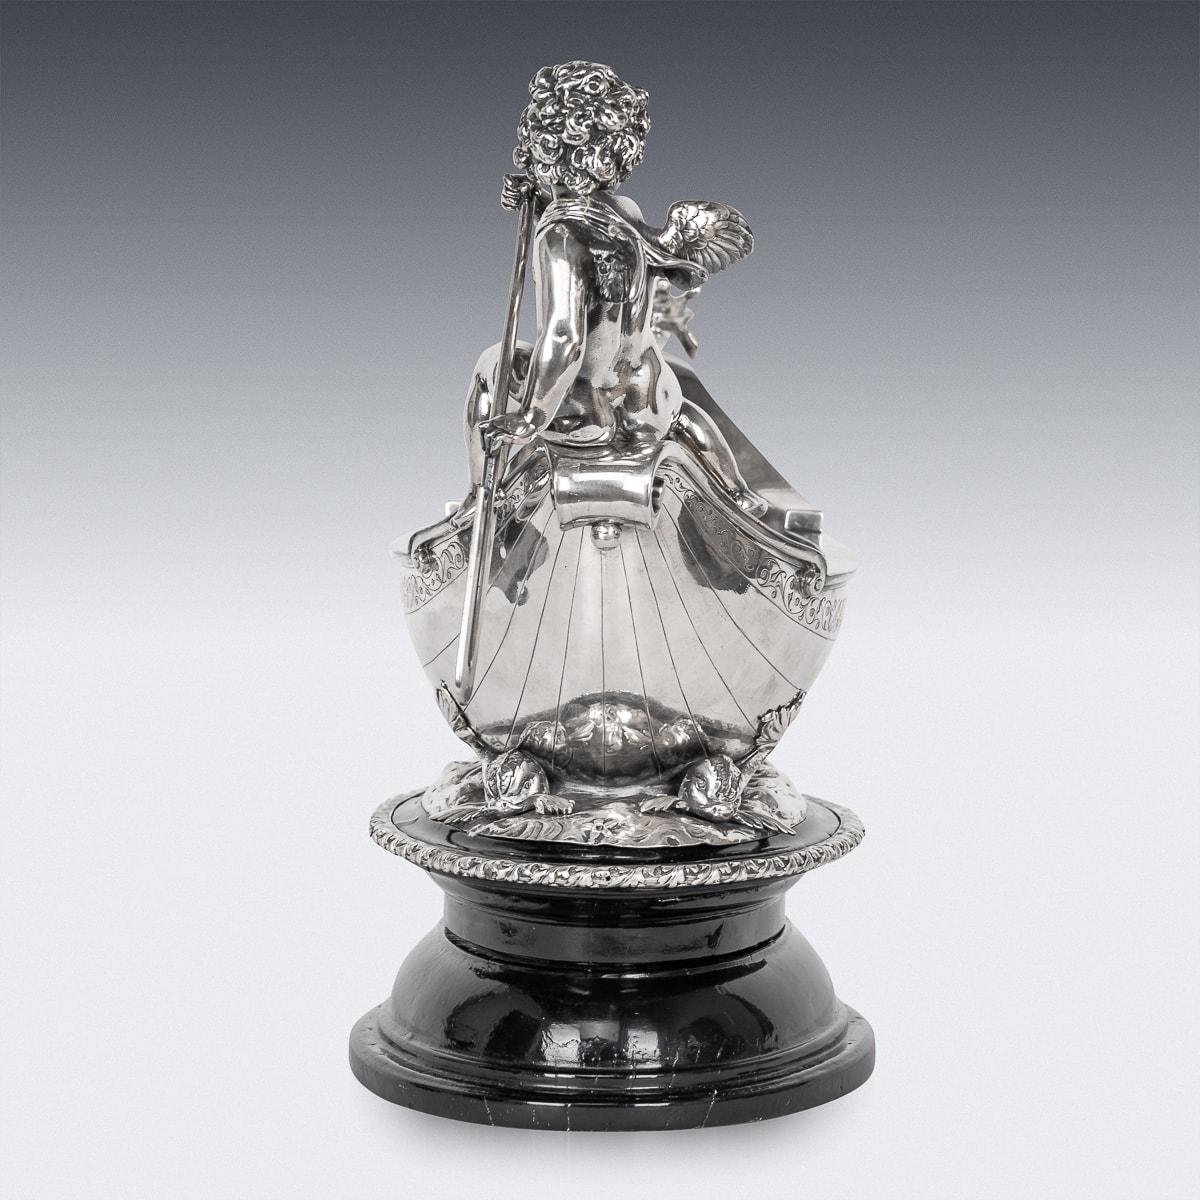 Antique early-20th Century Austrian exceptional solid silver centerpiece, crafted in the image of a majestic vessel, this remarkable piece features the regal visage of a beast adorning its prow, while a celestial cherub guides its course from the